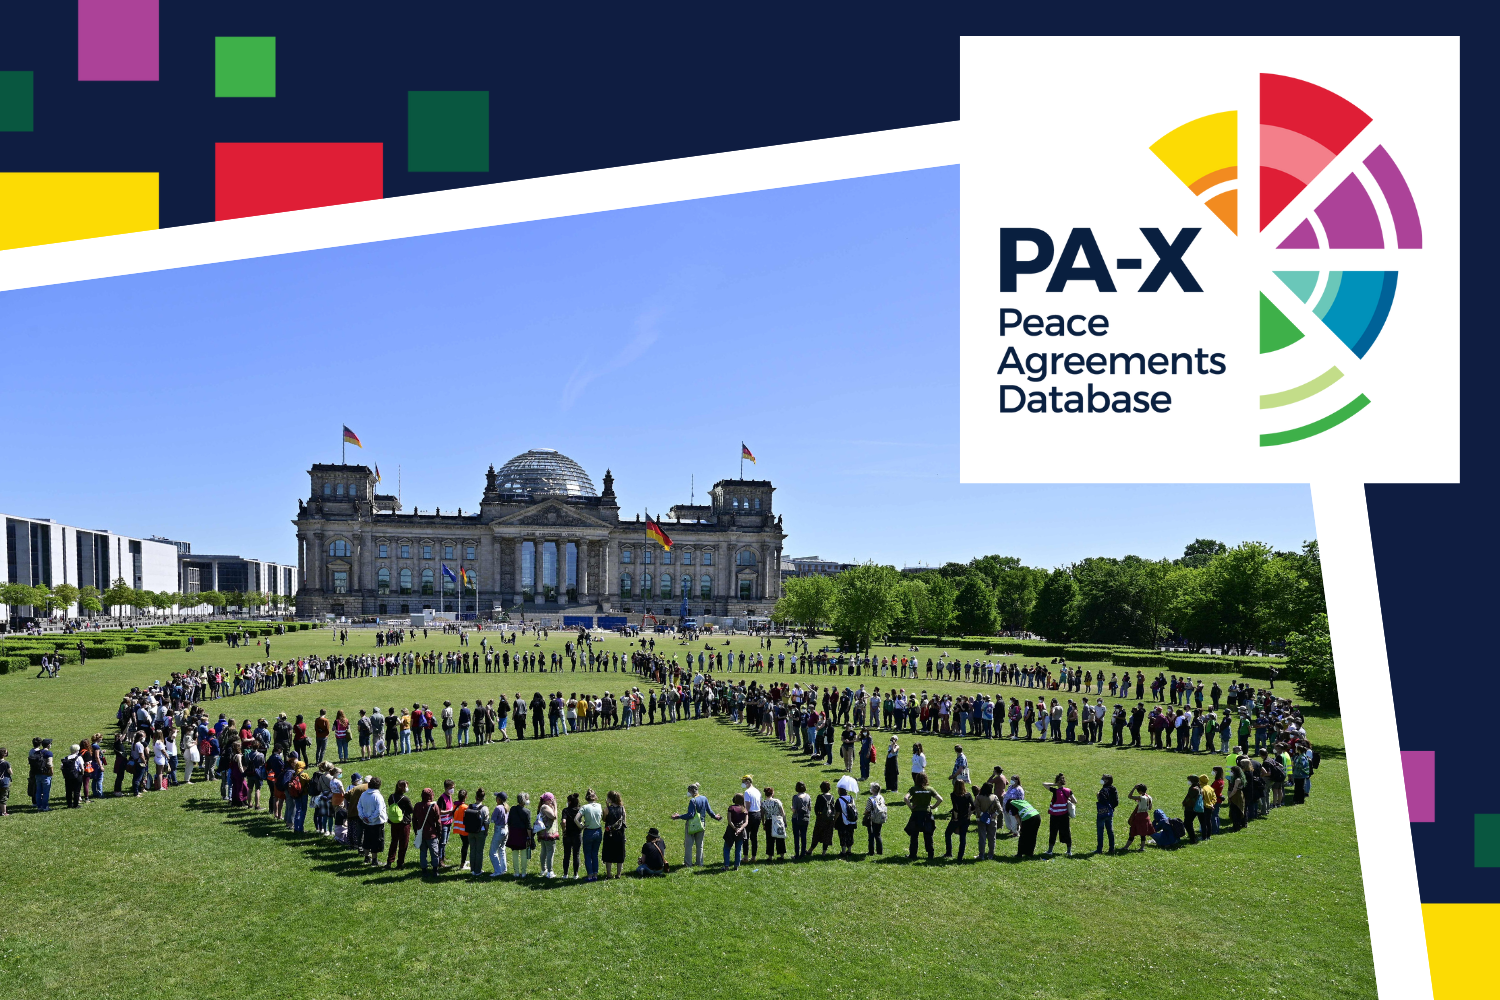 PeaceRep expands PA-X V7 to over 2000 agreements